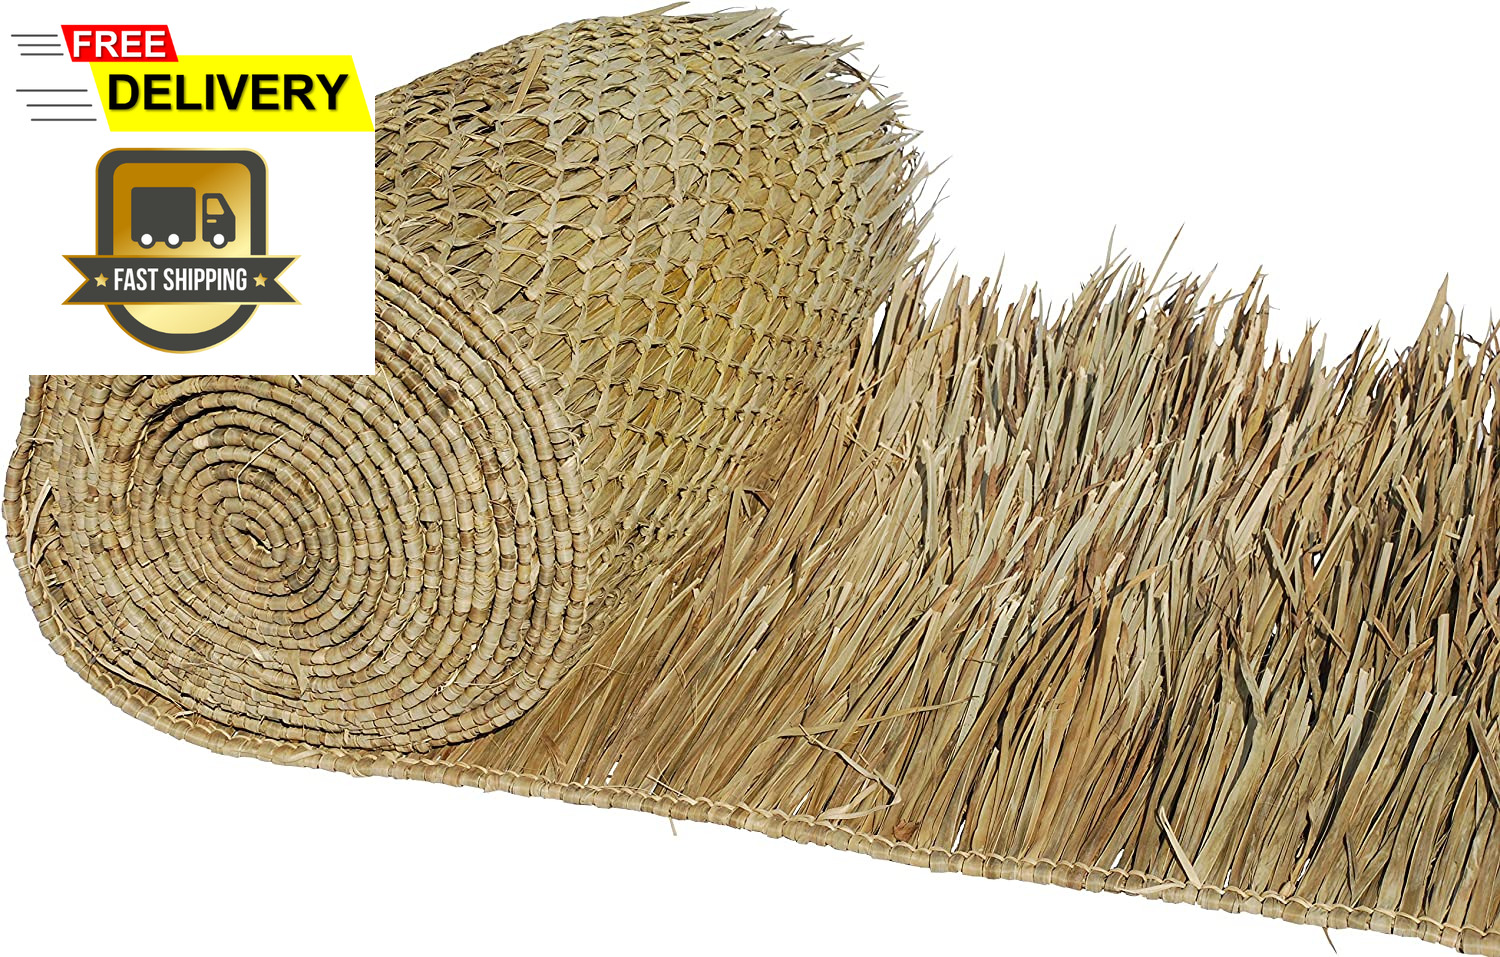 Eco-Friendly Mexican Roof Thatch - Hand-Woven Palm Leaf Roll for DIY Projects, D